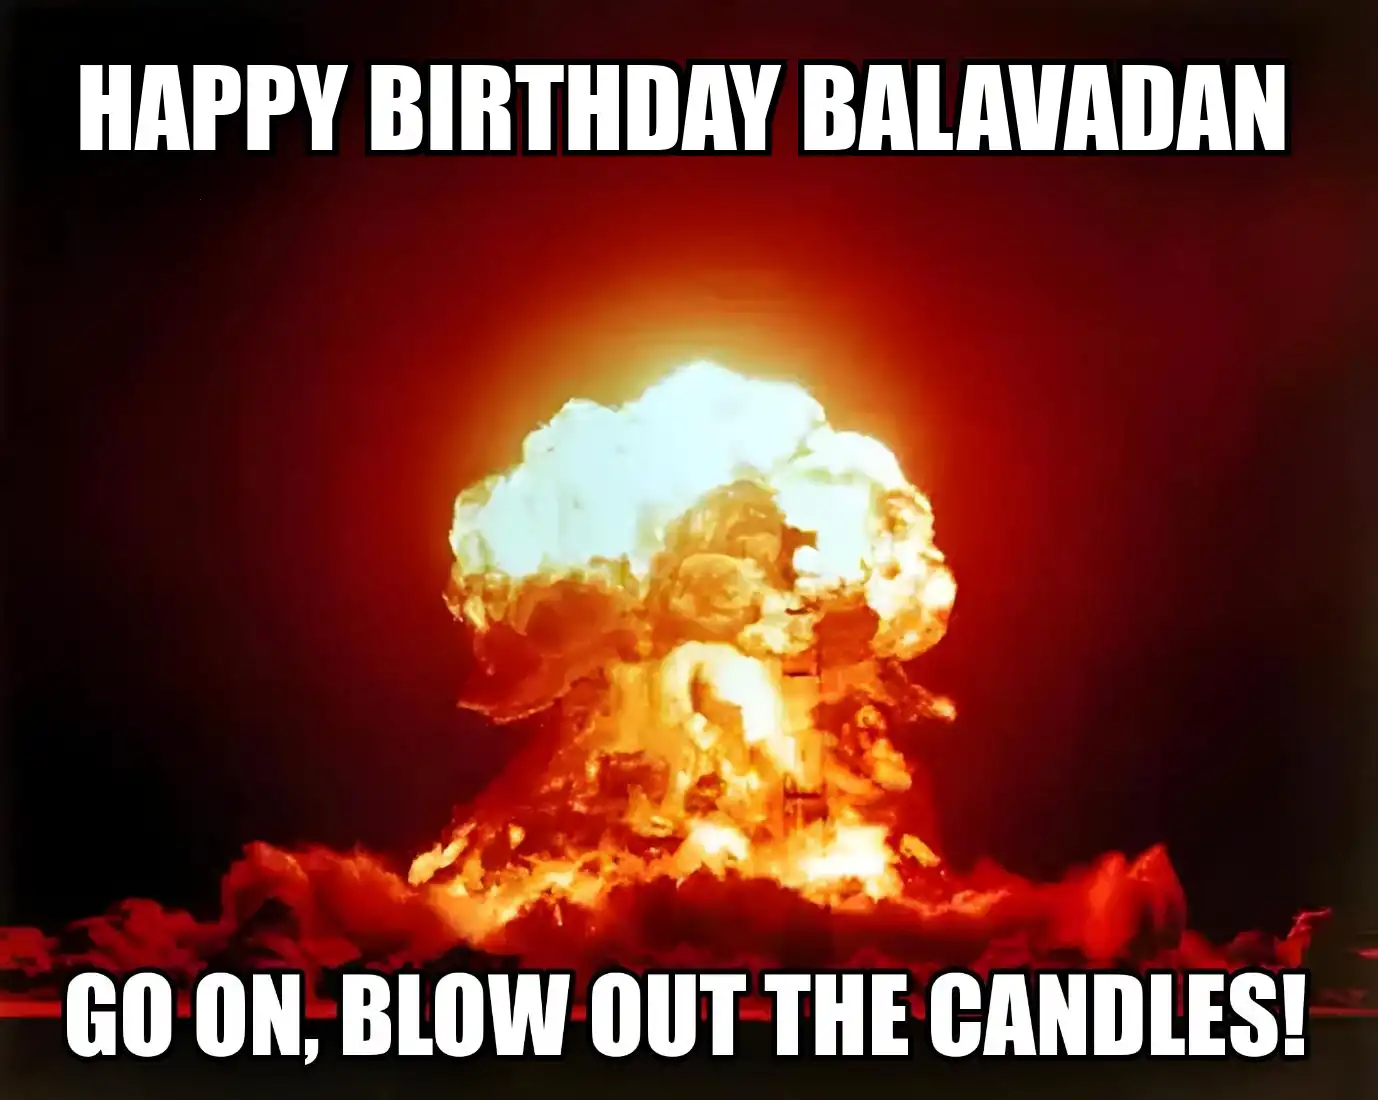 Happy Birthday Balavadan Go On Blow Out The Candles Meme